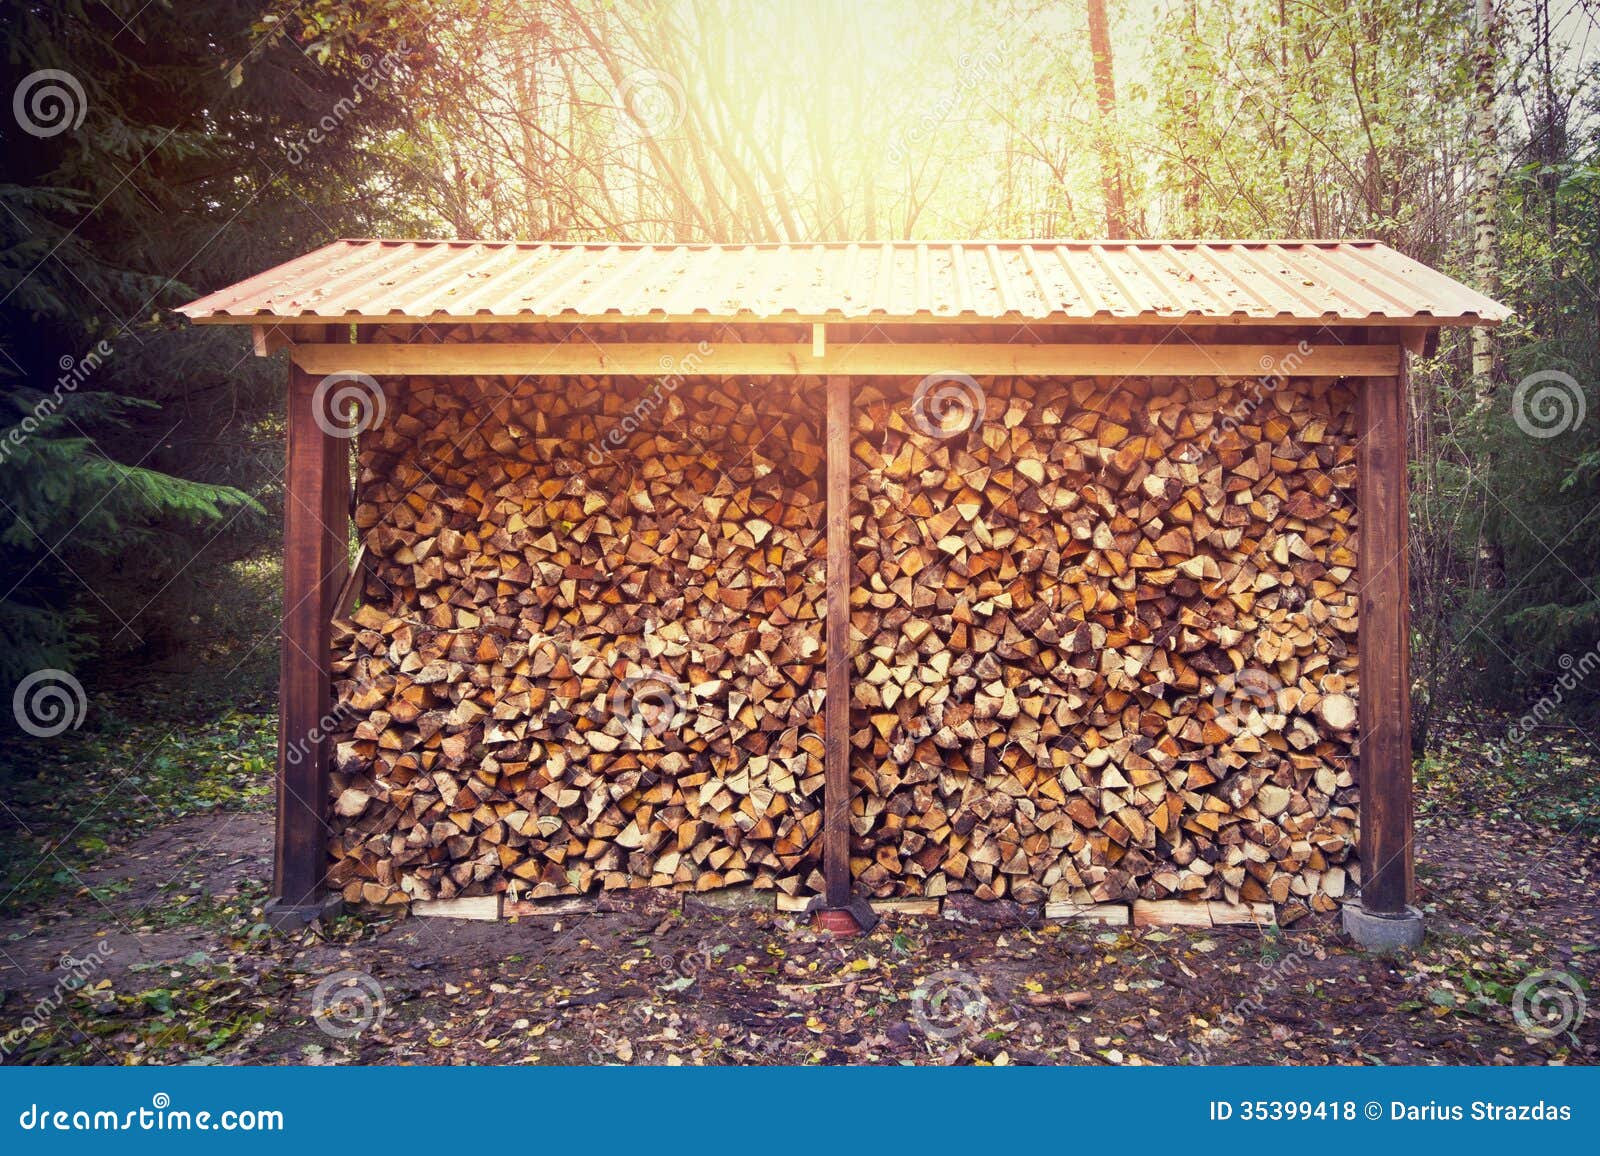 Firewood Stacked In Shed Royalty Free Stock Photos - Image ...